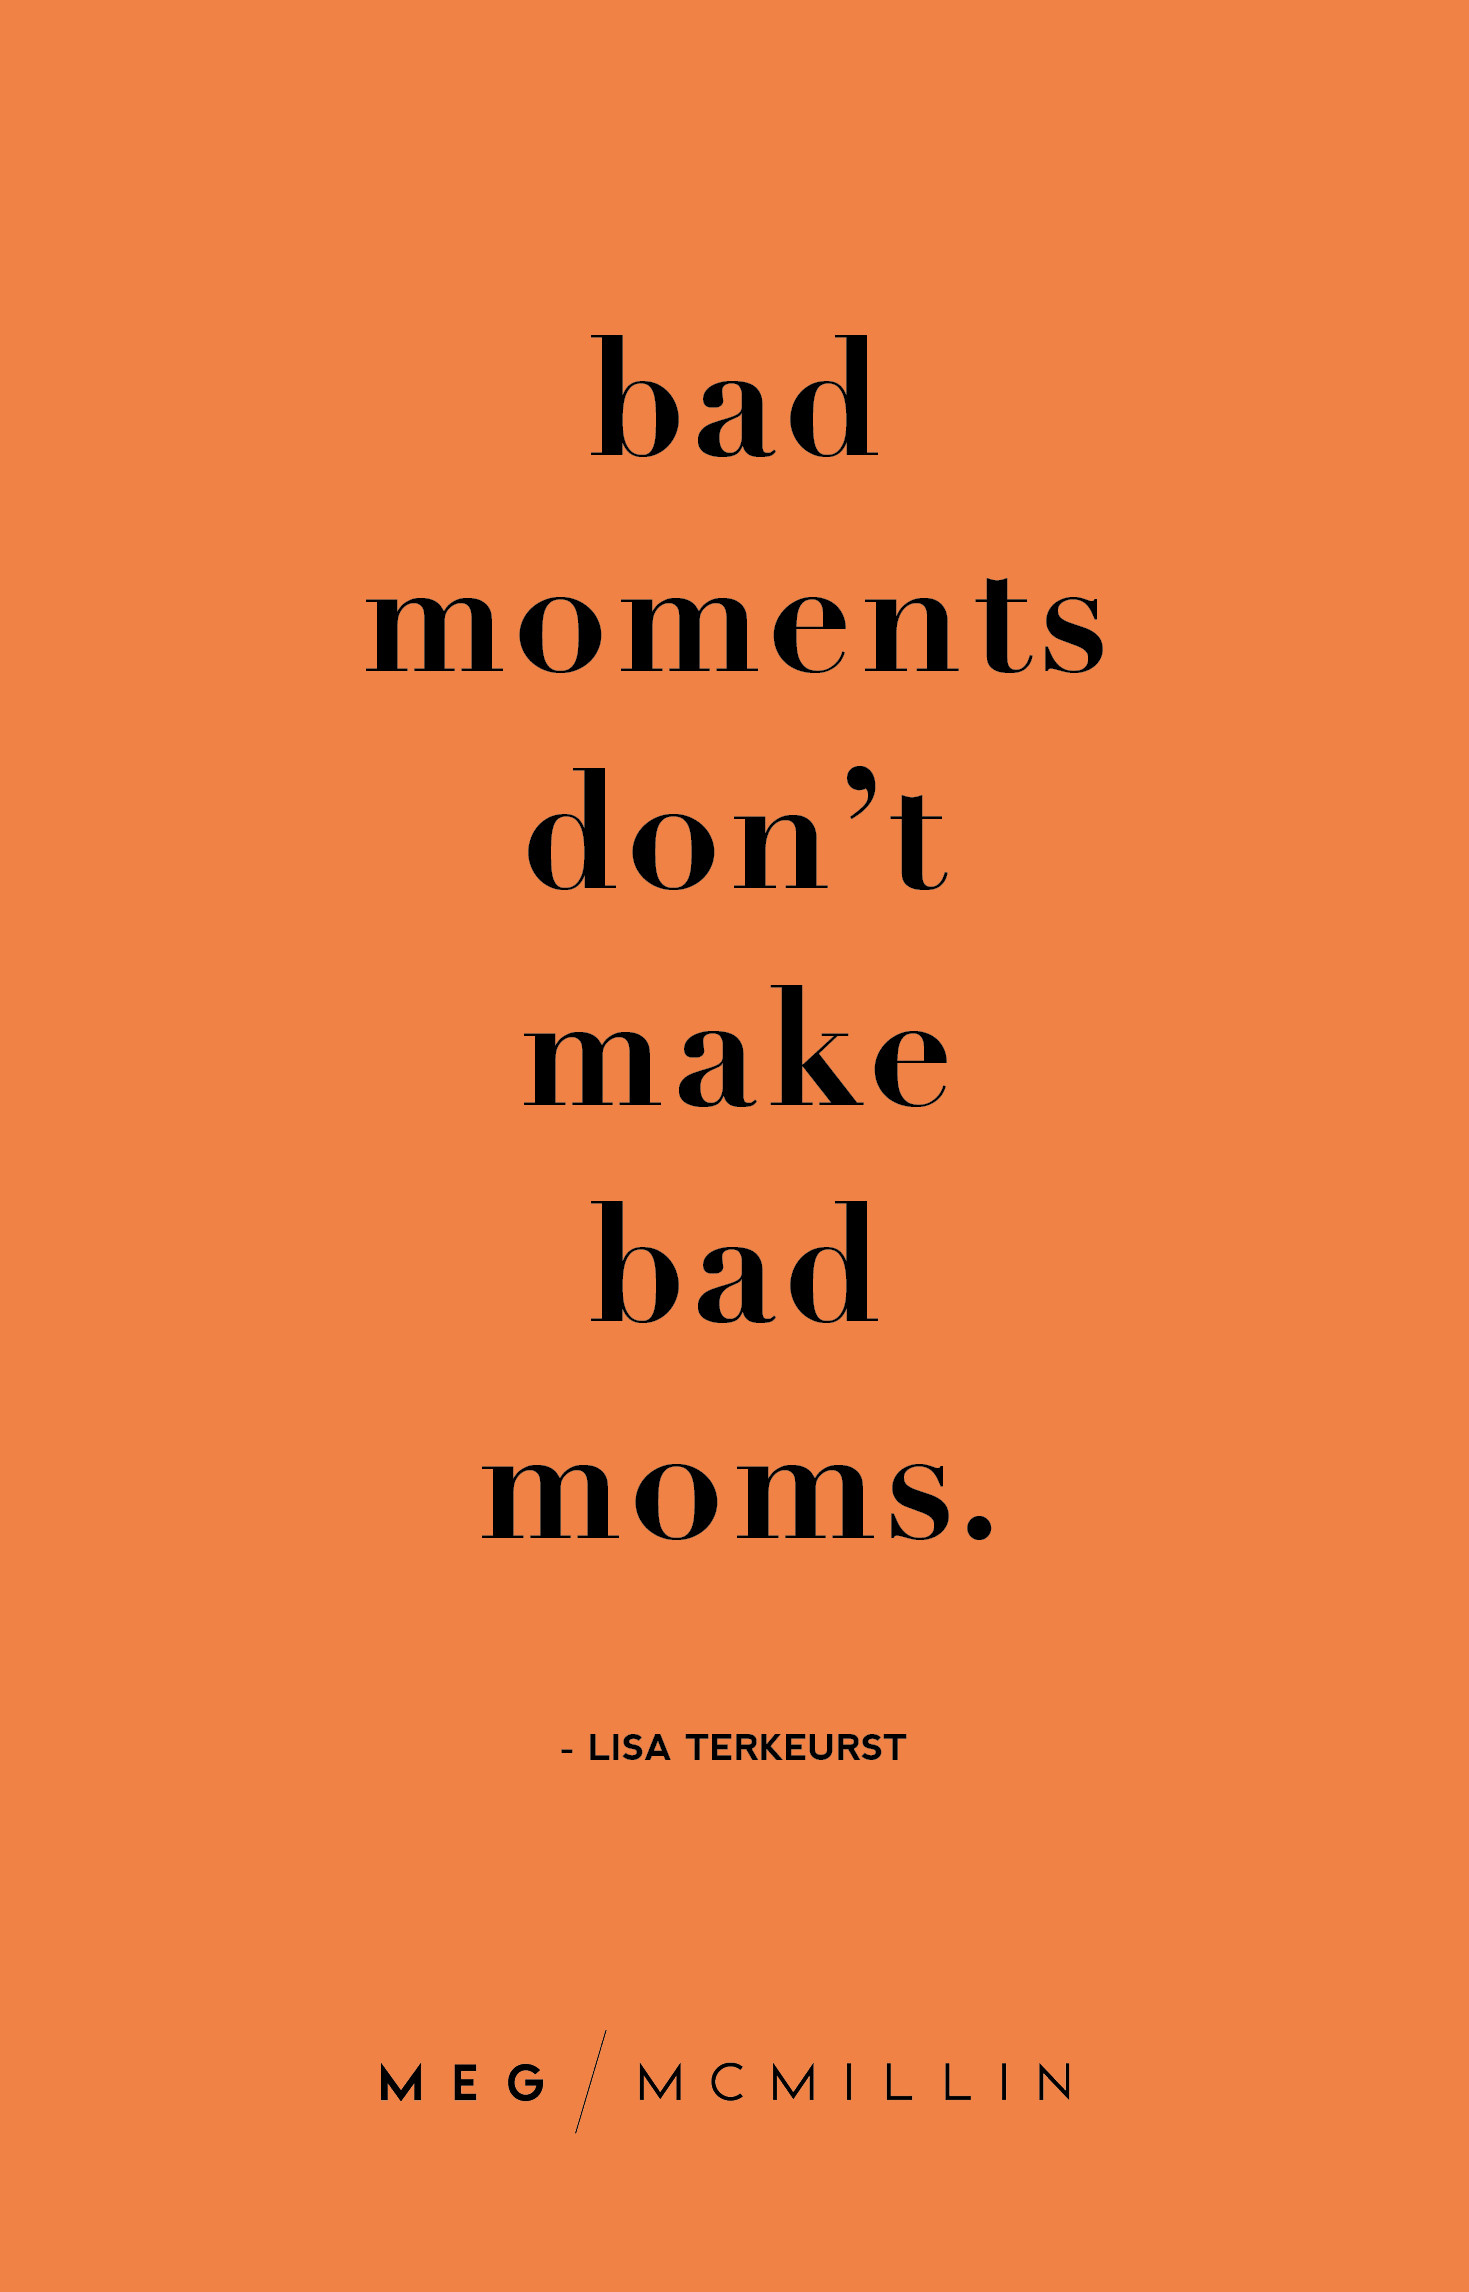 Motivational Quotes For Moms
 10 inspiring mom quotes to you through a tough day